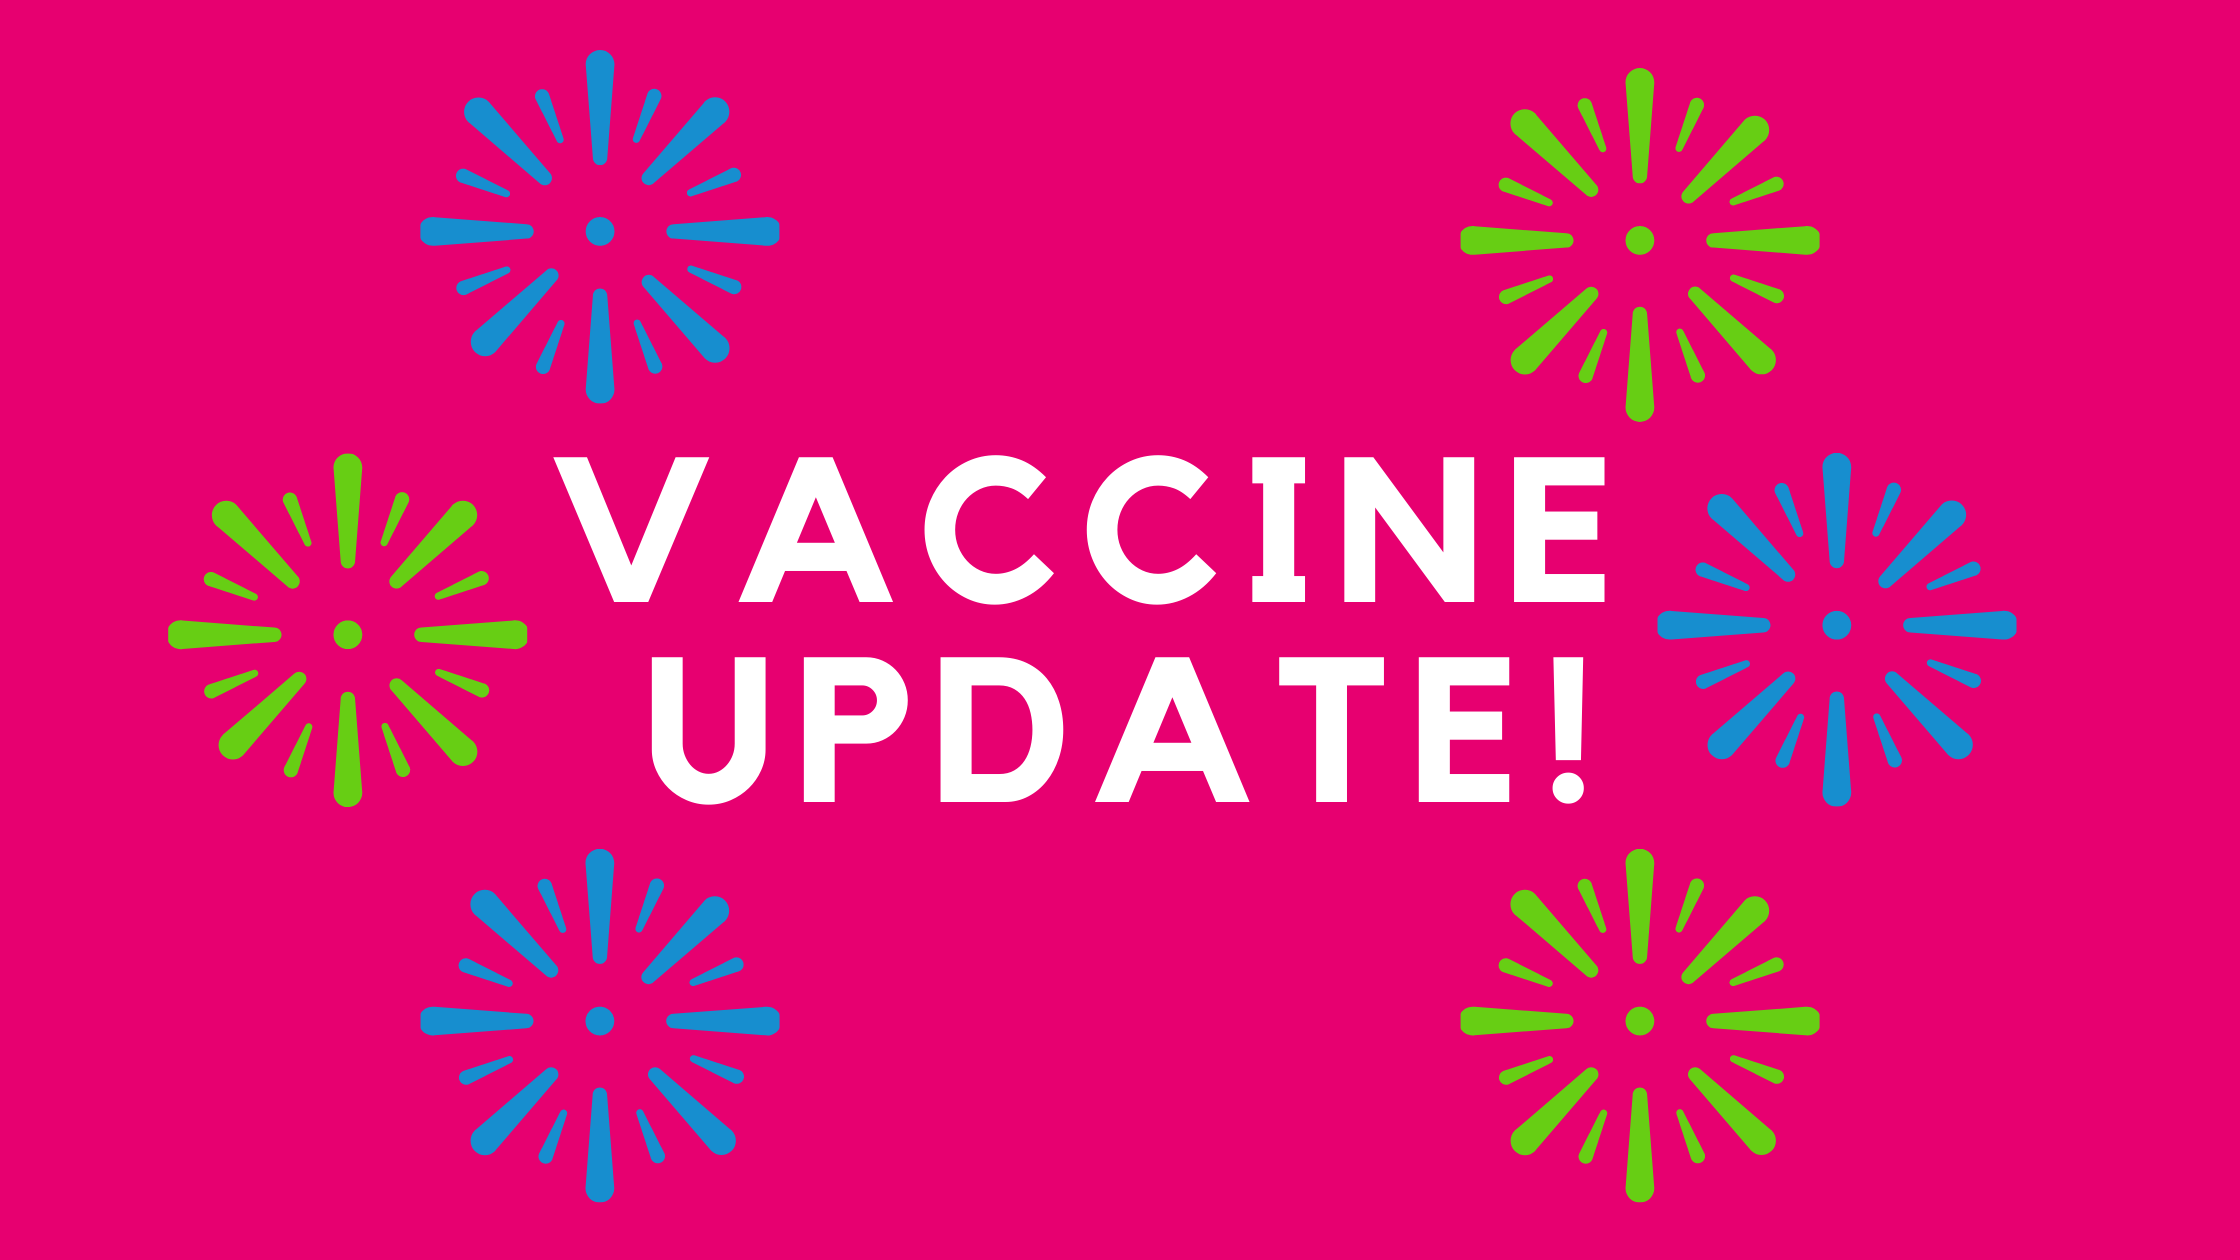 COVID-19 Vaccine Update (as of April 6, 2021)